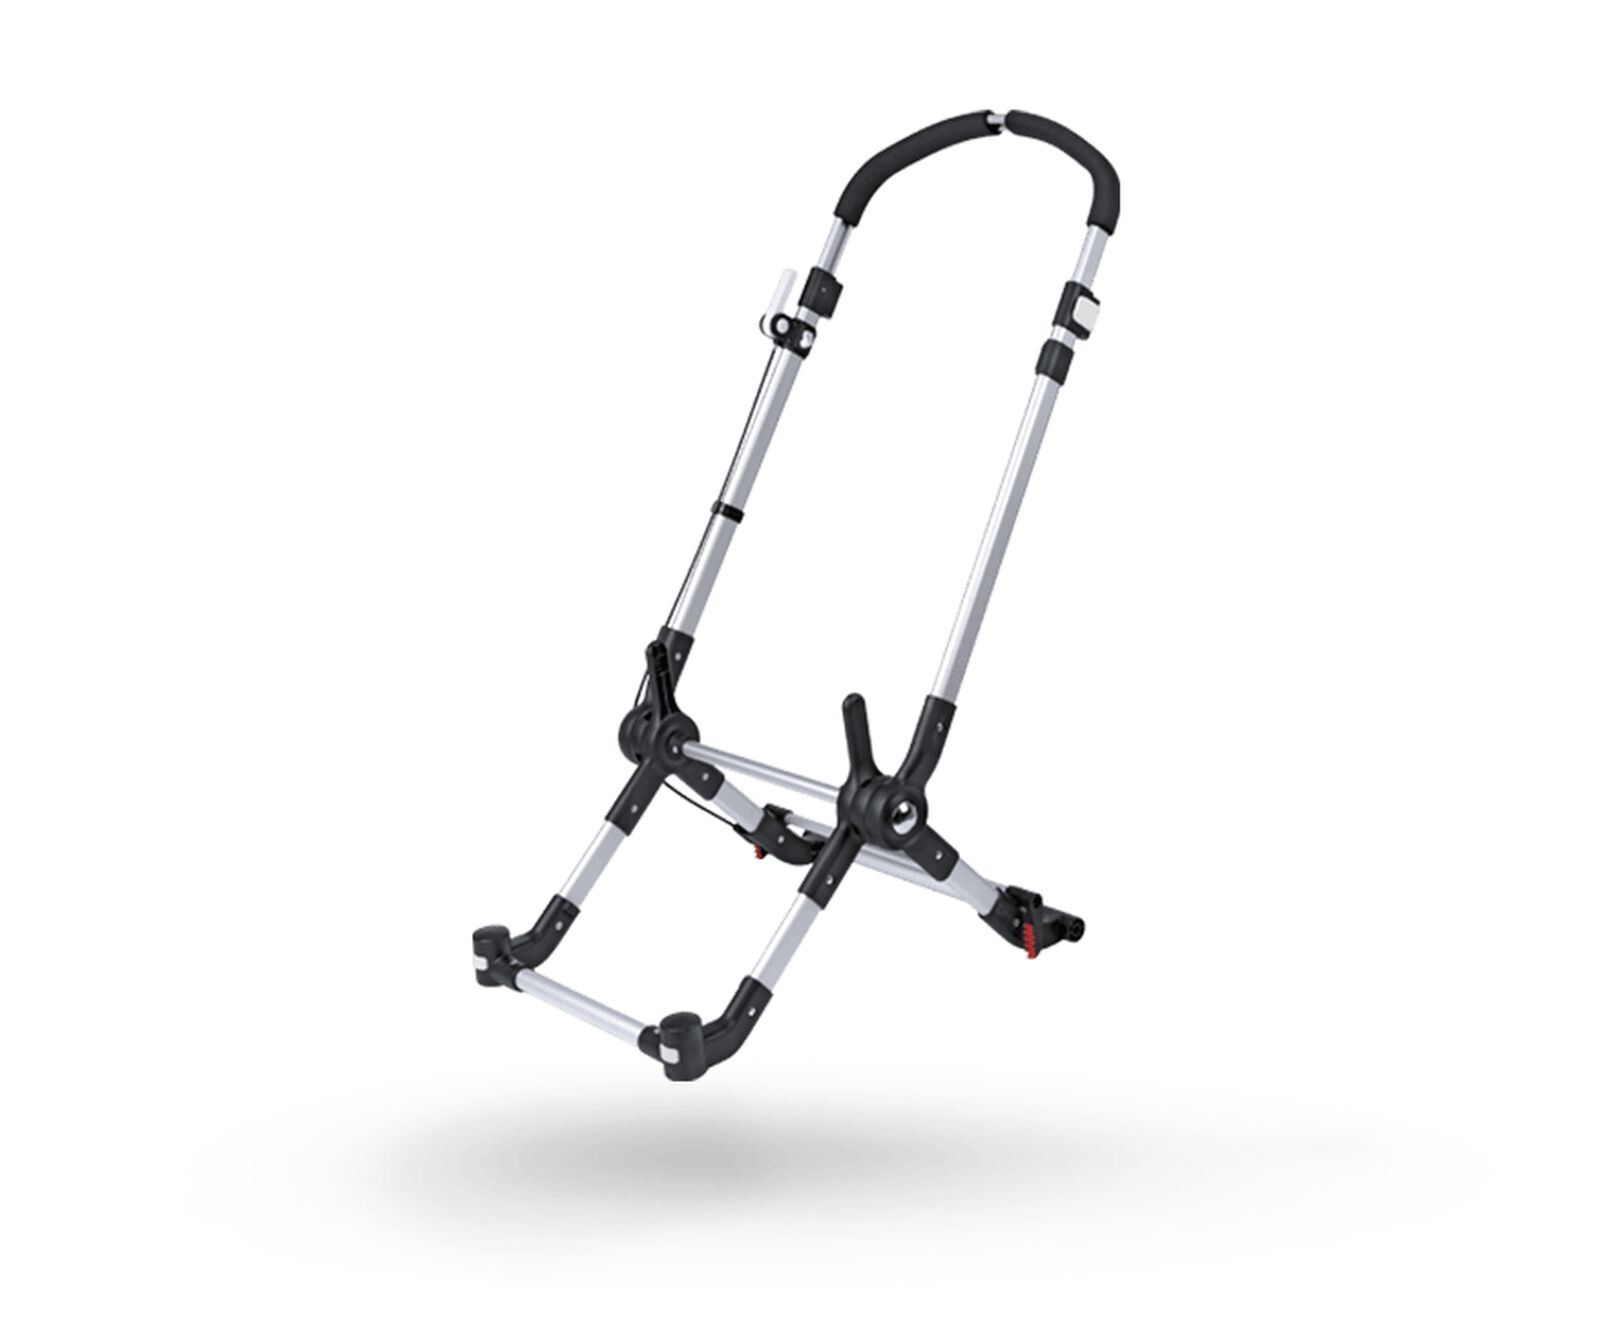 Bugaboo Cameleon 3 Plus chassis - View 1